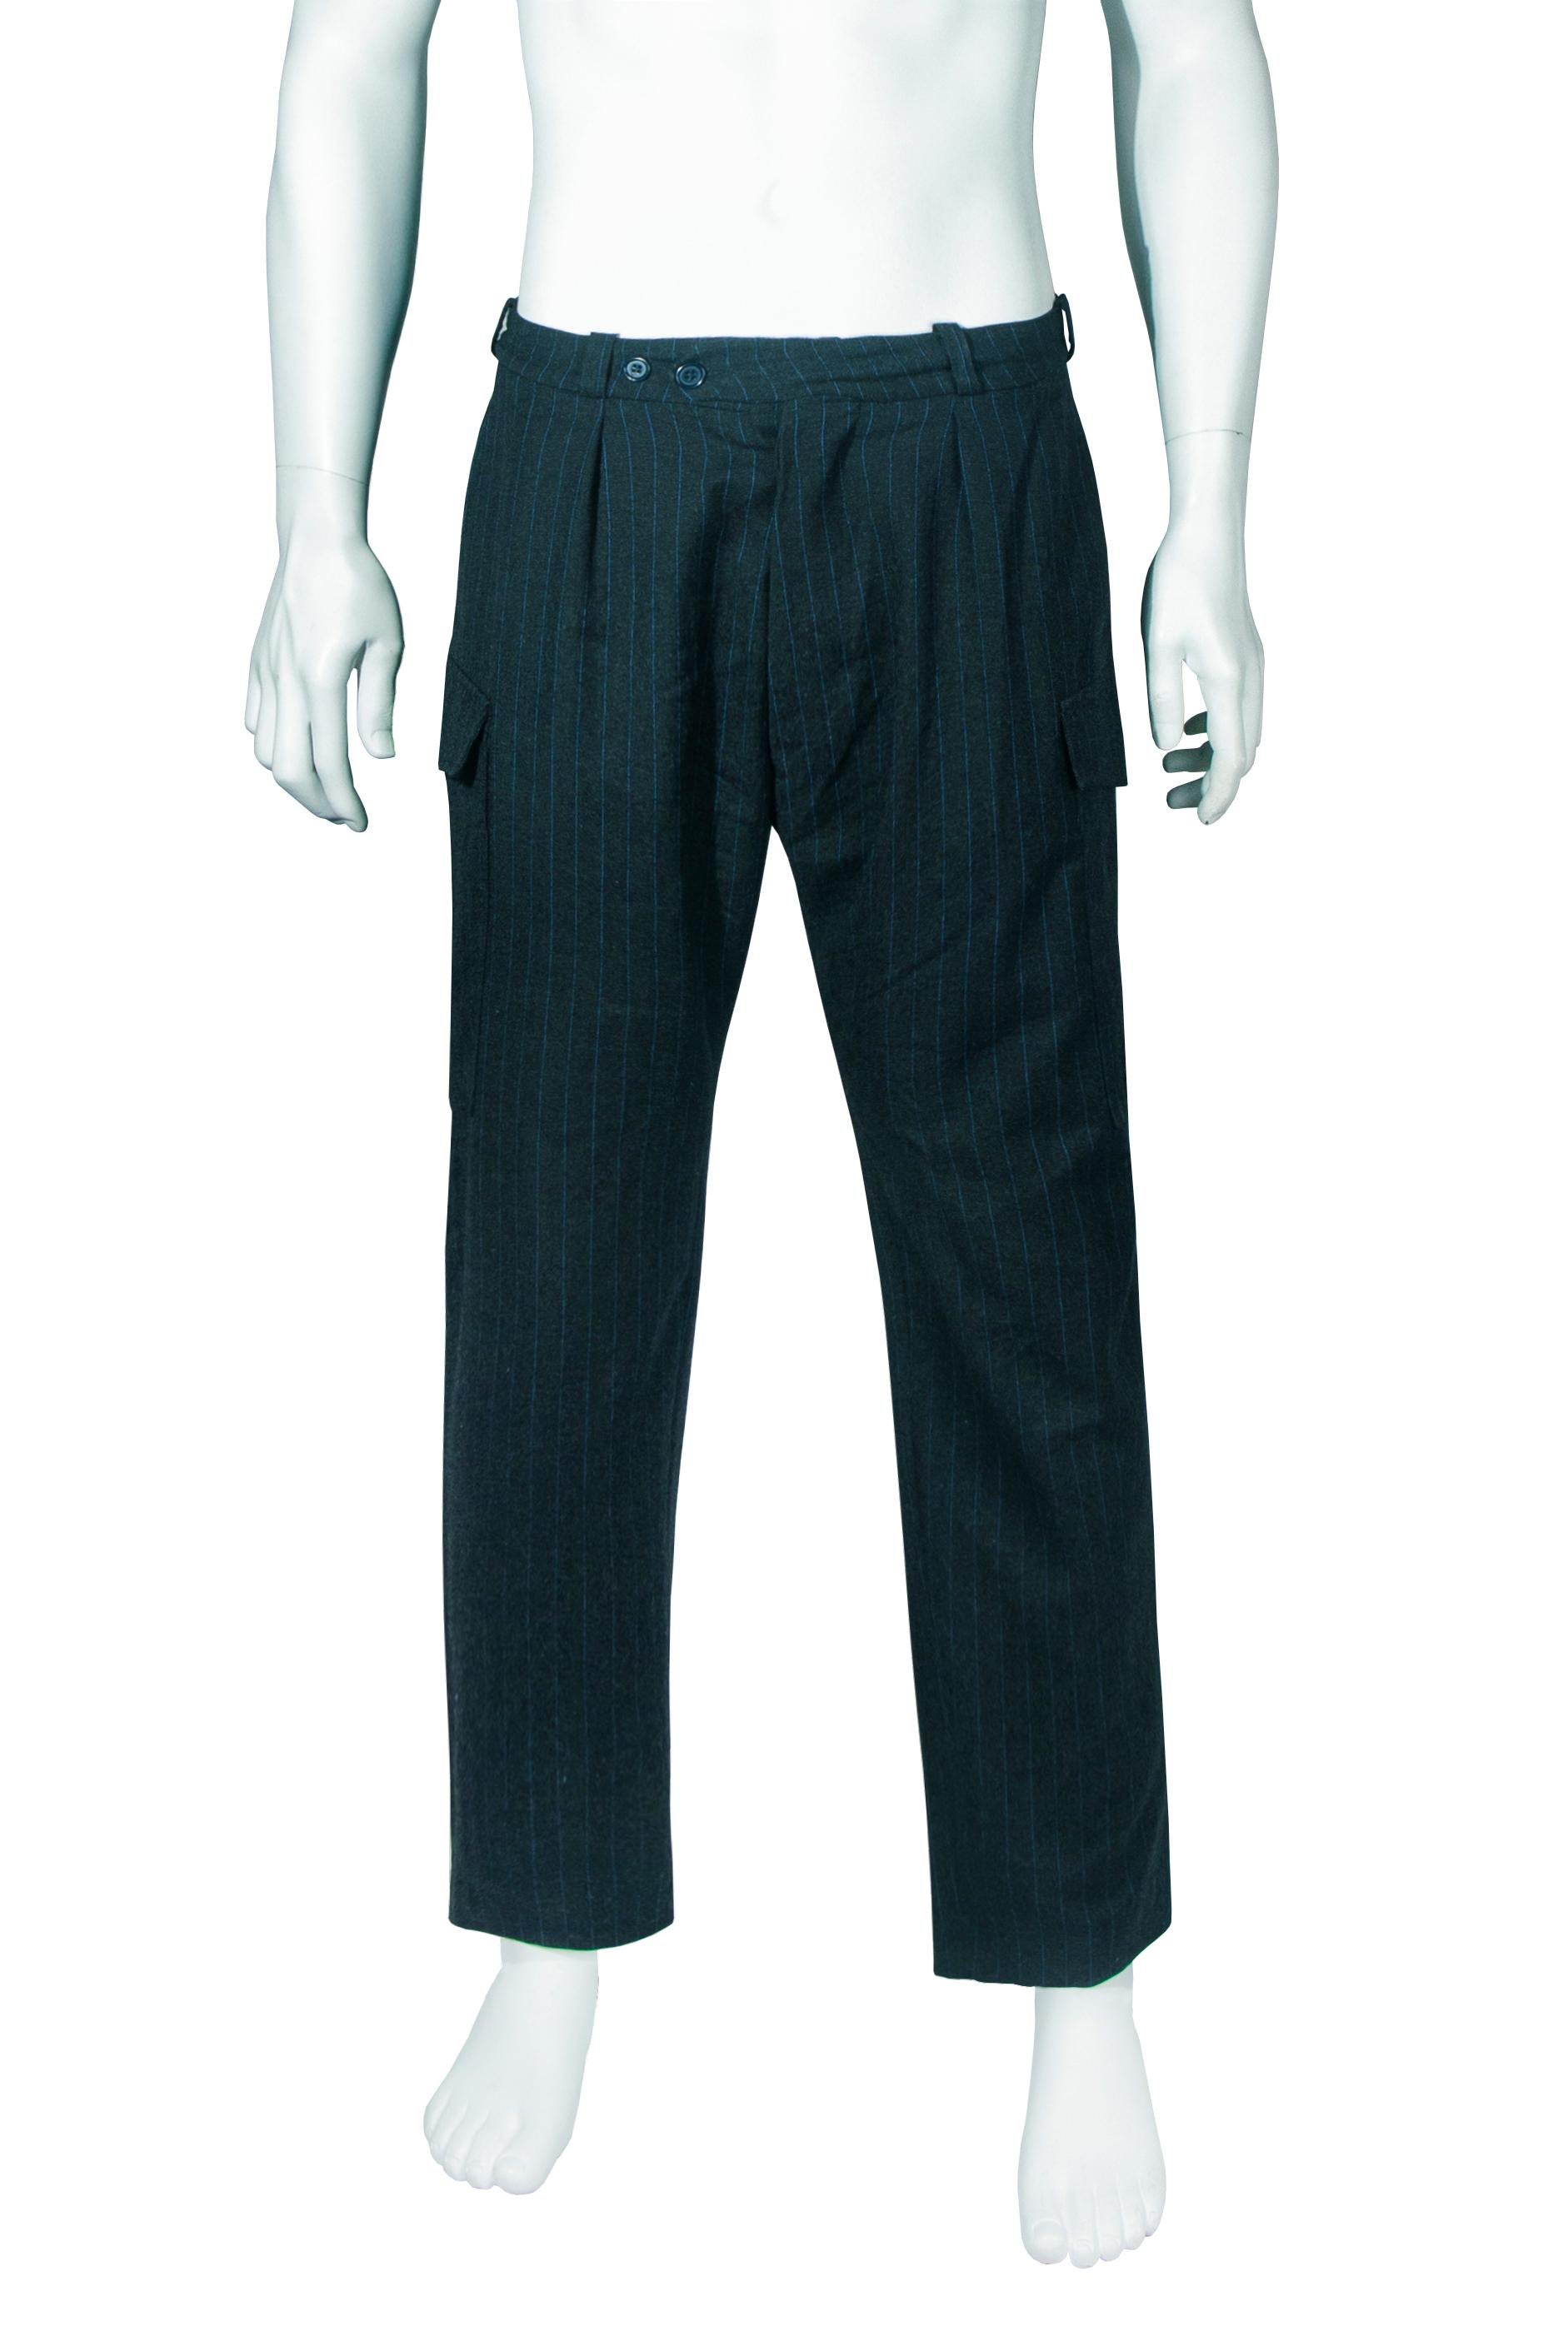 Alexander McQueen 'It's a Jungle Out There' men's blue pinstripe cargo trousers, fall-winter 1997. Worn in look 24, this garment is a rare example of McQueen's early menswear and Saville Row training. These skills learned during his apprenticeship